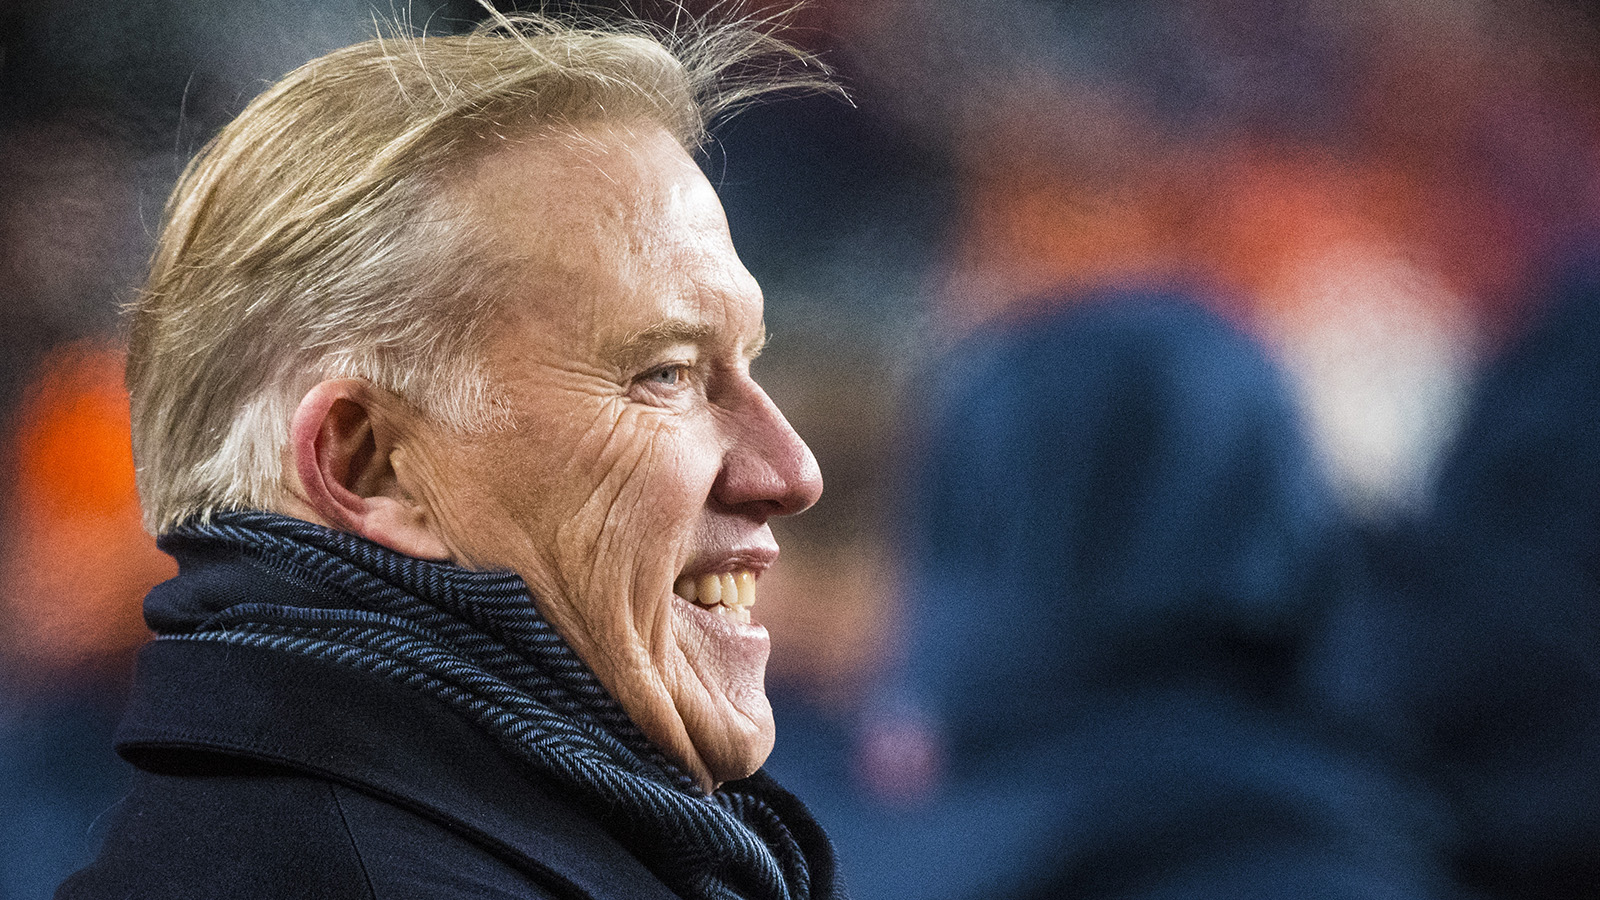 John Elway of the Denver Broncos at Empower Field at Mile High on Dec. 29, 2019, during a game against the Oakland Raiders.